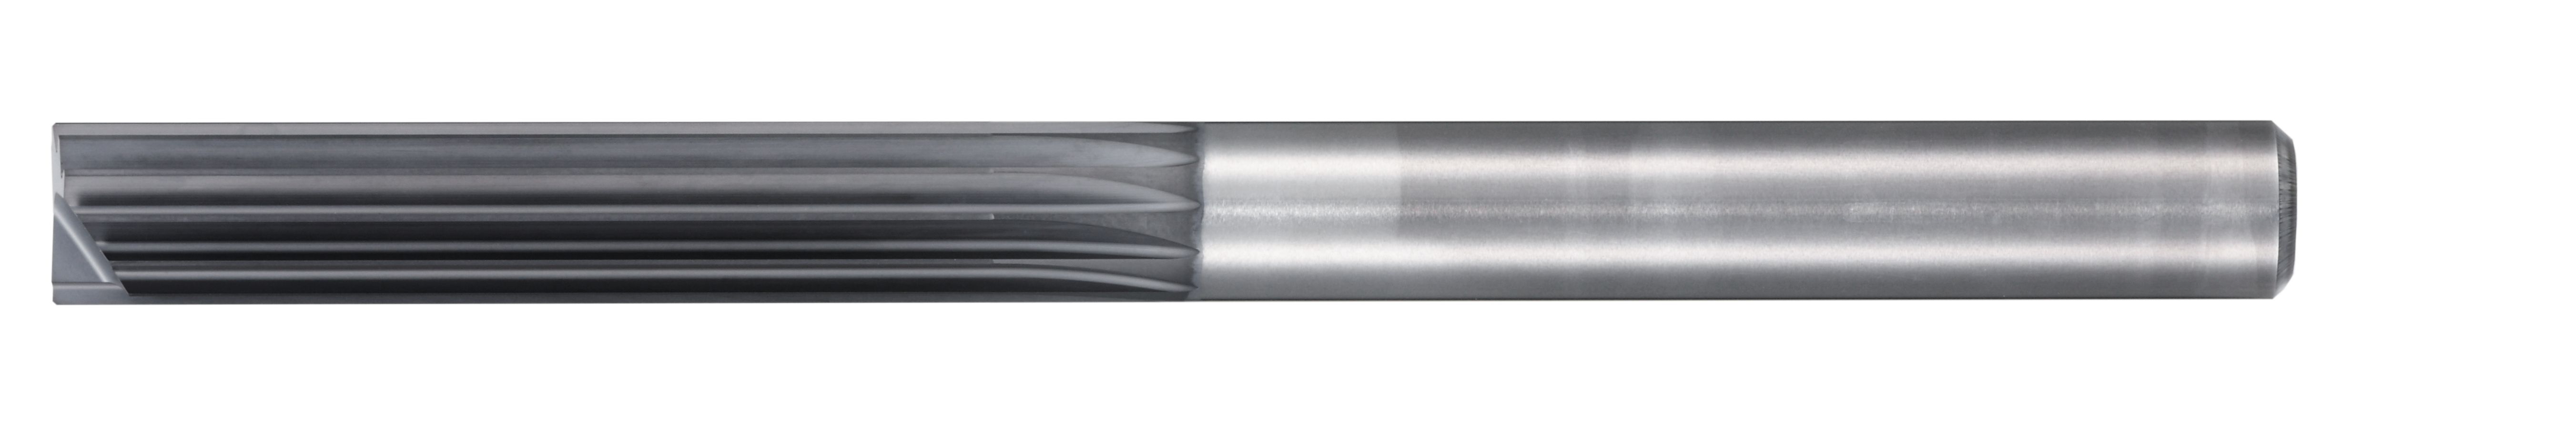 Grooving/Shouldering Multi-Flute End Mill for CFRP with End Flute CR100 6719 6719-012.000